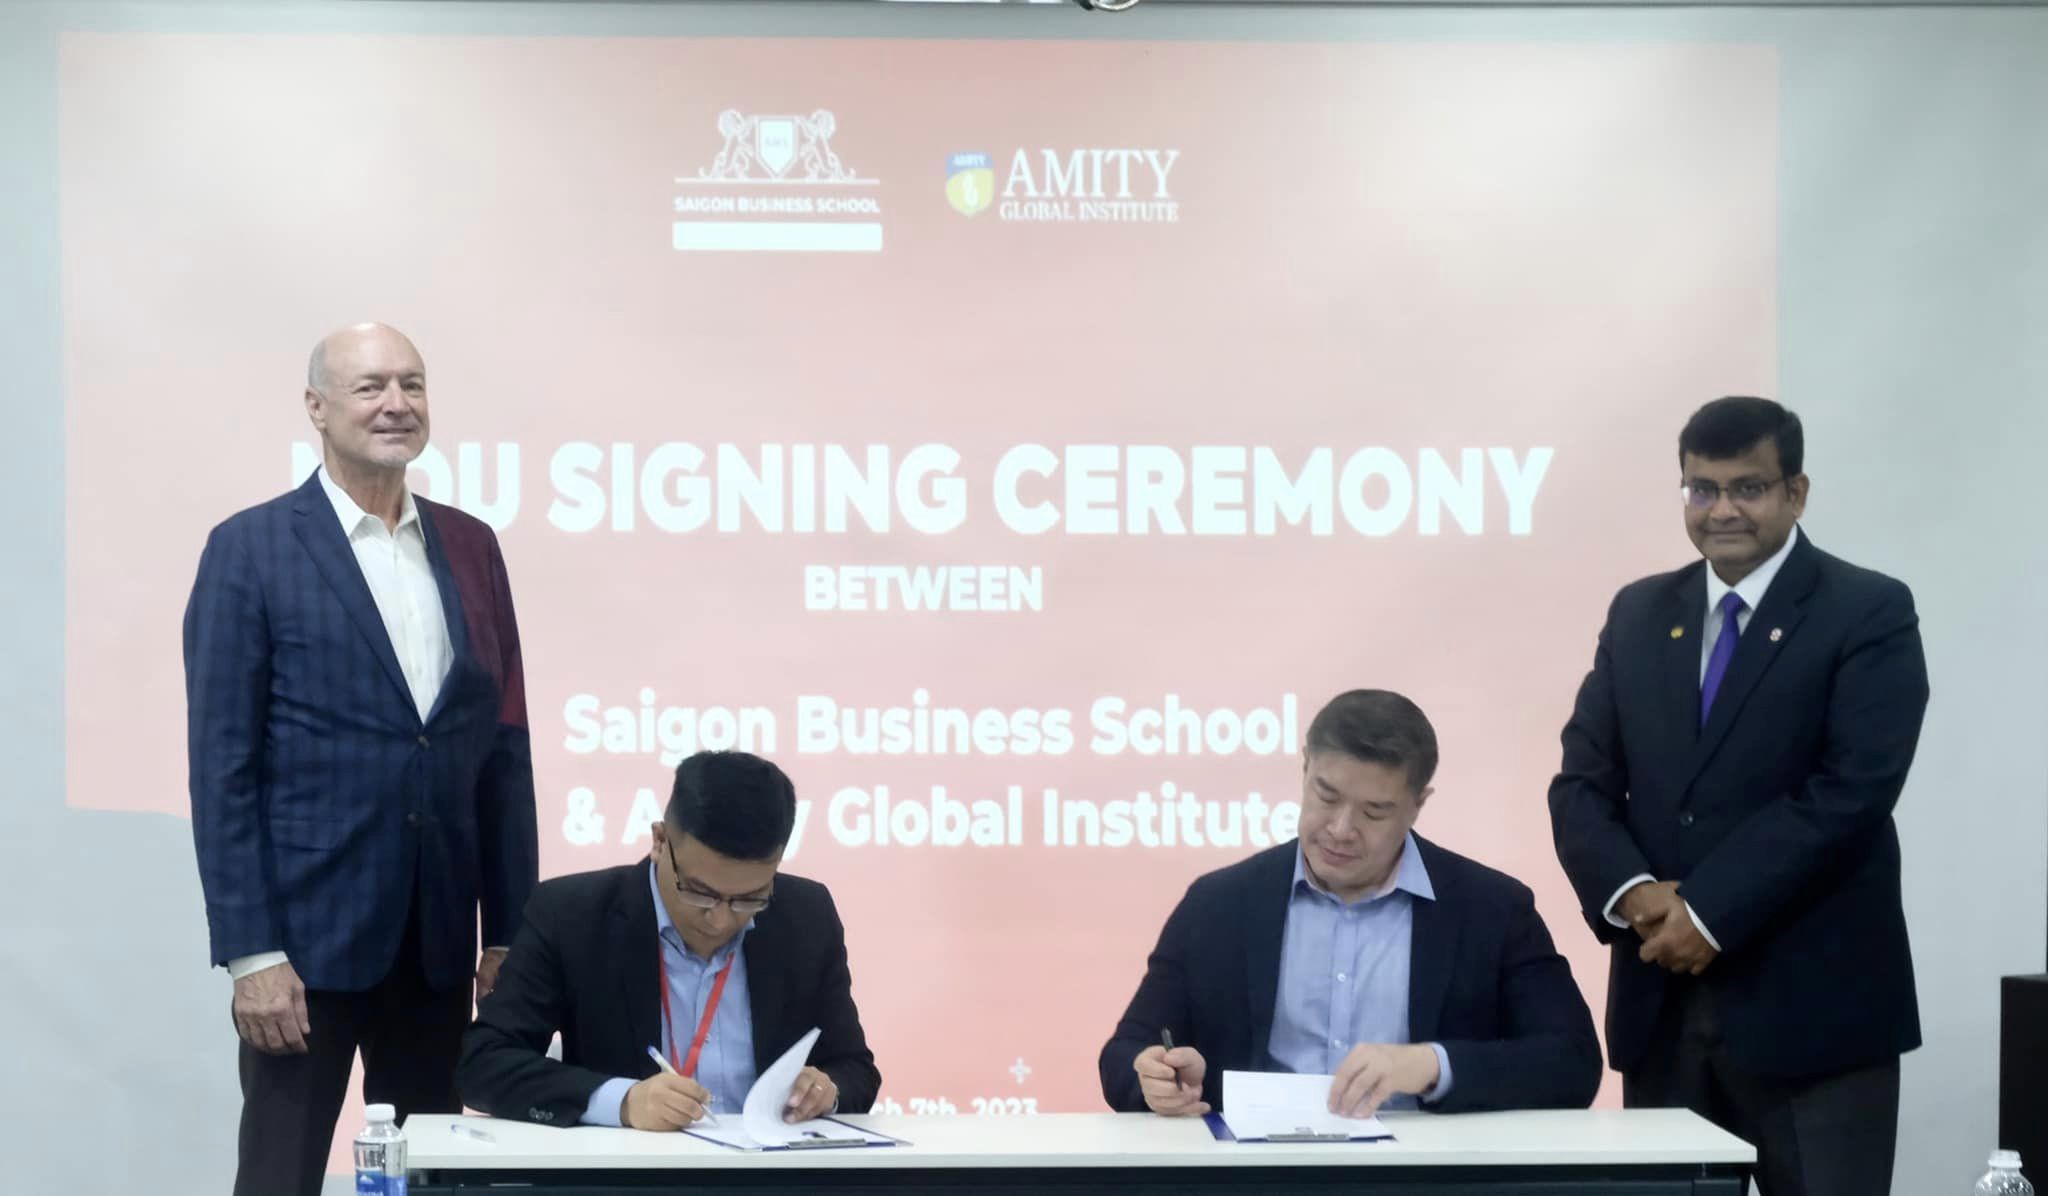 MoU SIGNING CEREMONY: SBS x AMITY GLOBAL